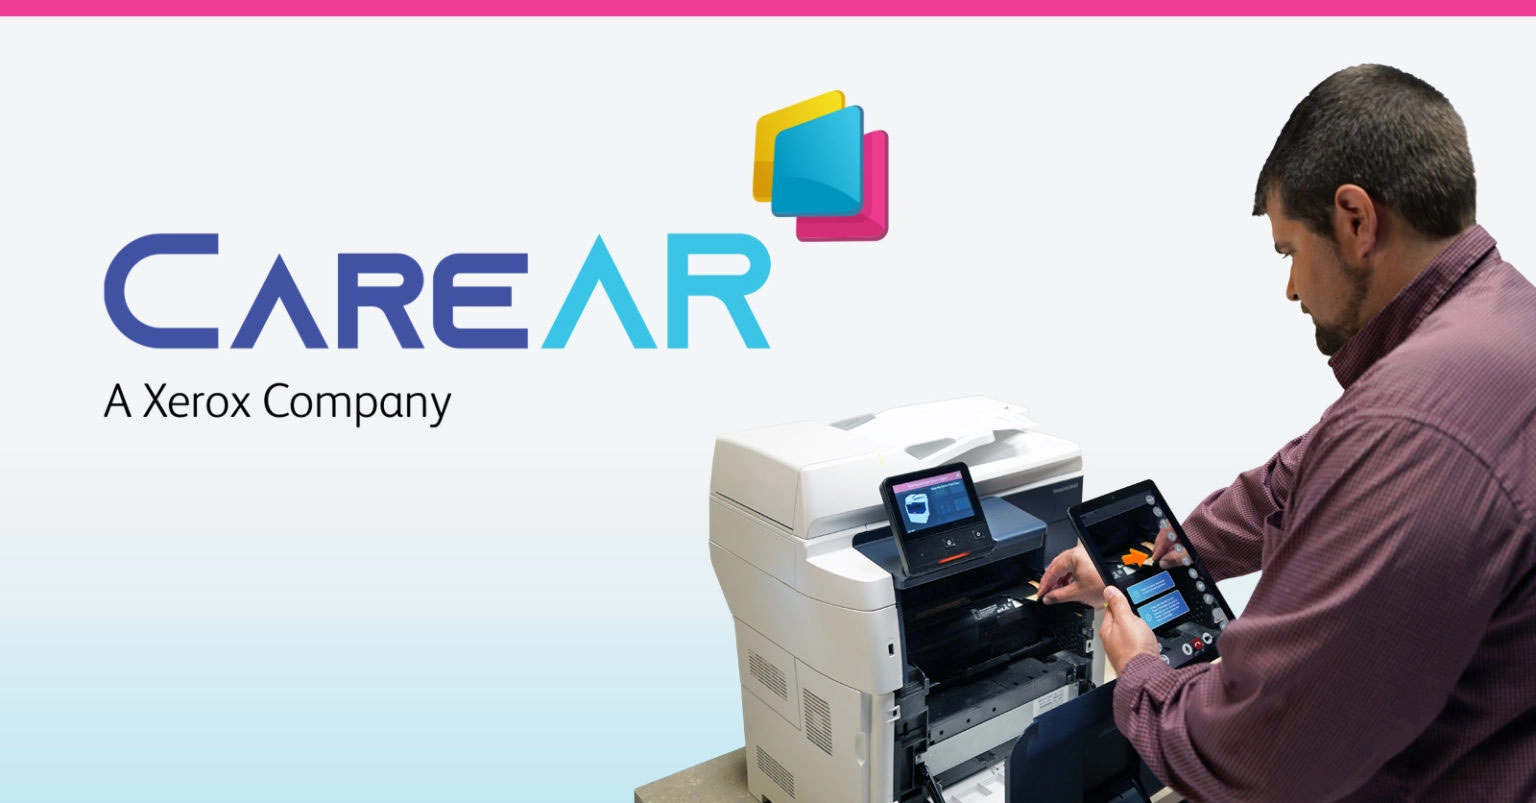 CareAR Has Been a Positive Experience for Customers, Employees, and Operations